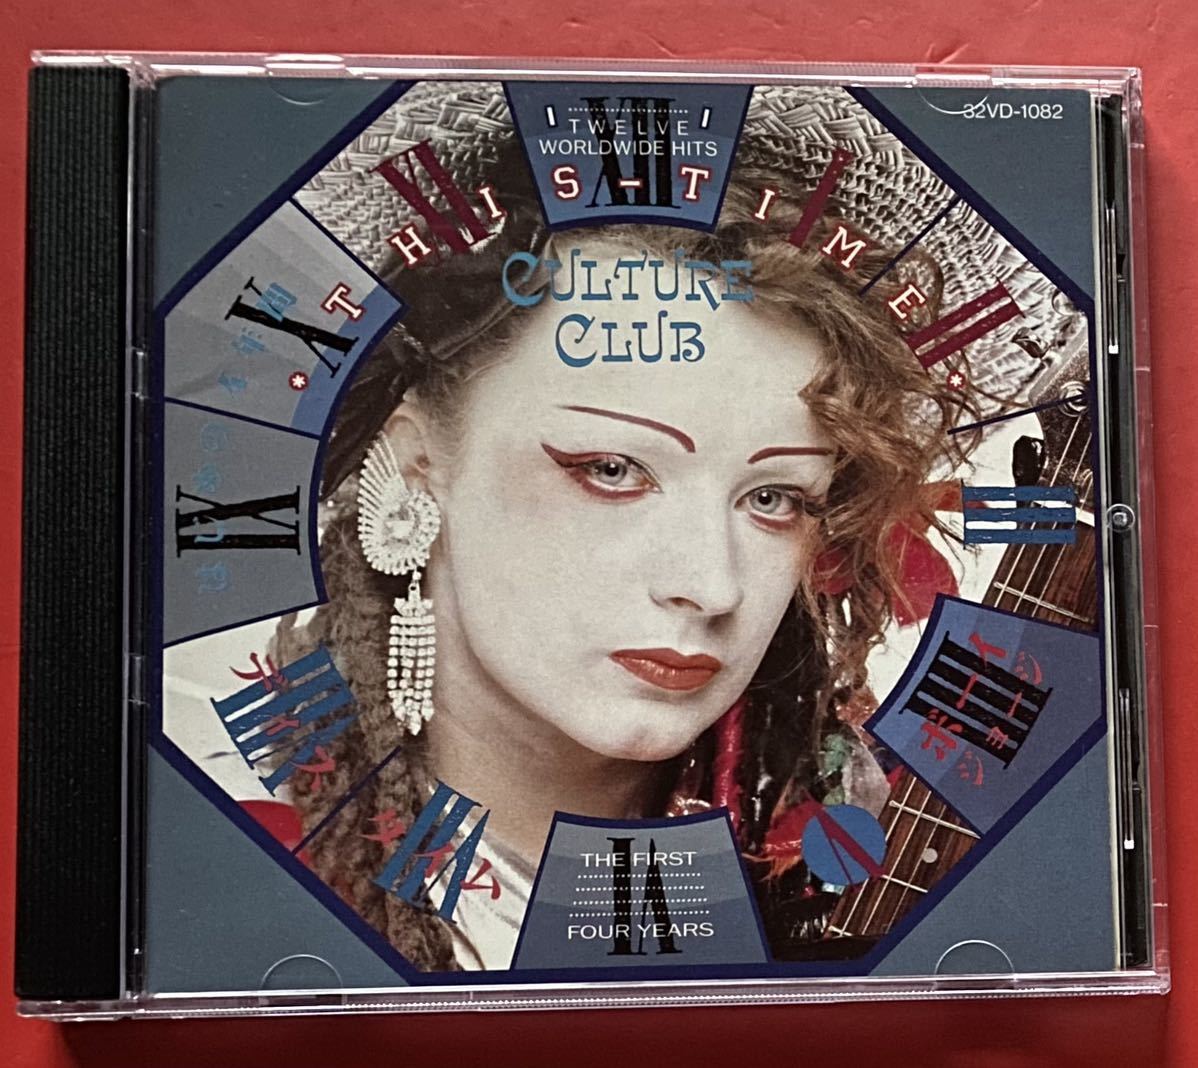 【CD】カルチャー・クラブ「THIS TIME」Culture Club 国内盤 盤面良好 [10080220]_画像1